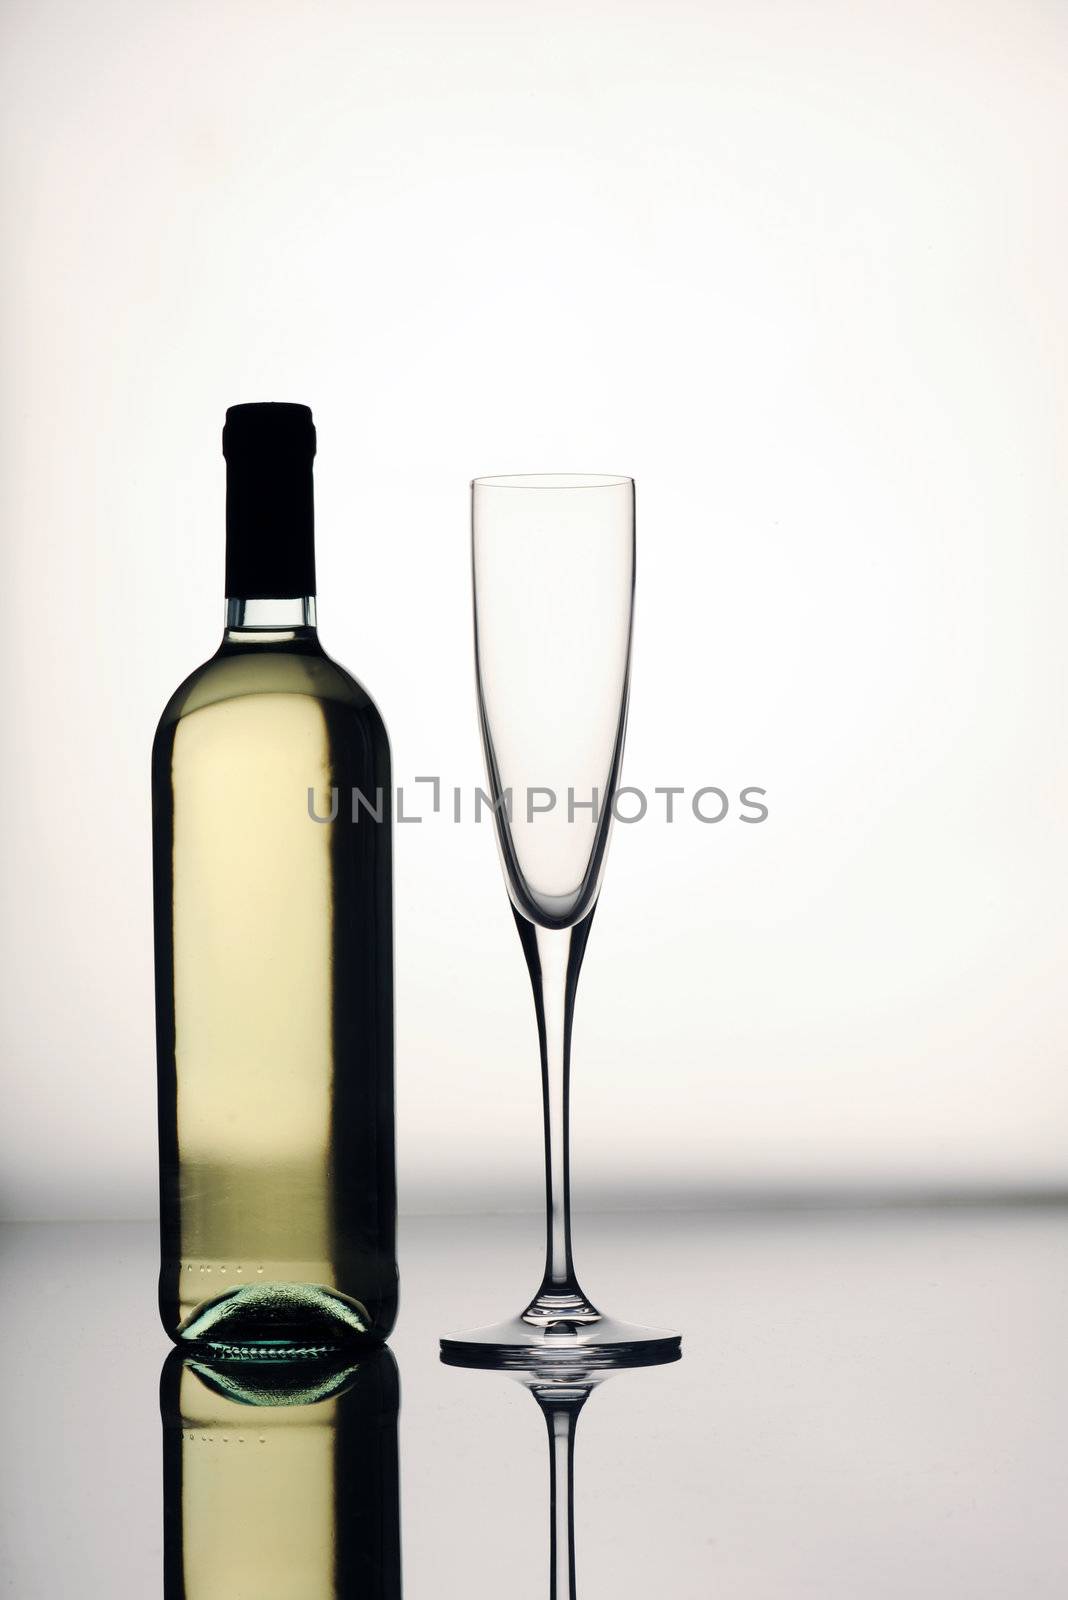 bottle and glass on a reflective surface